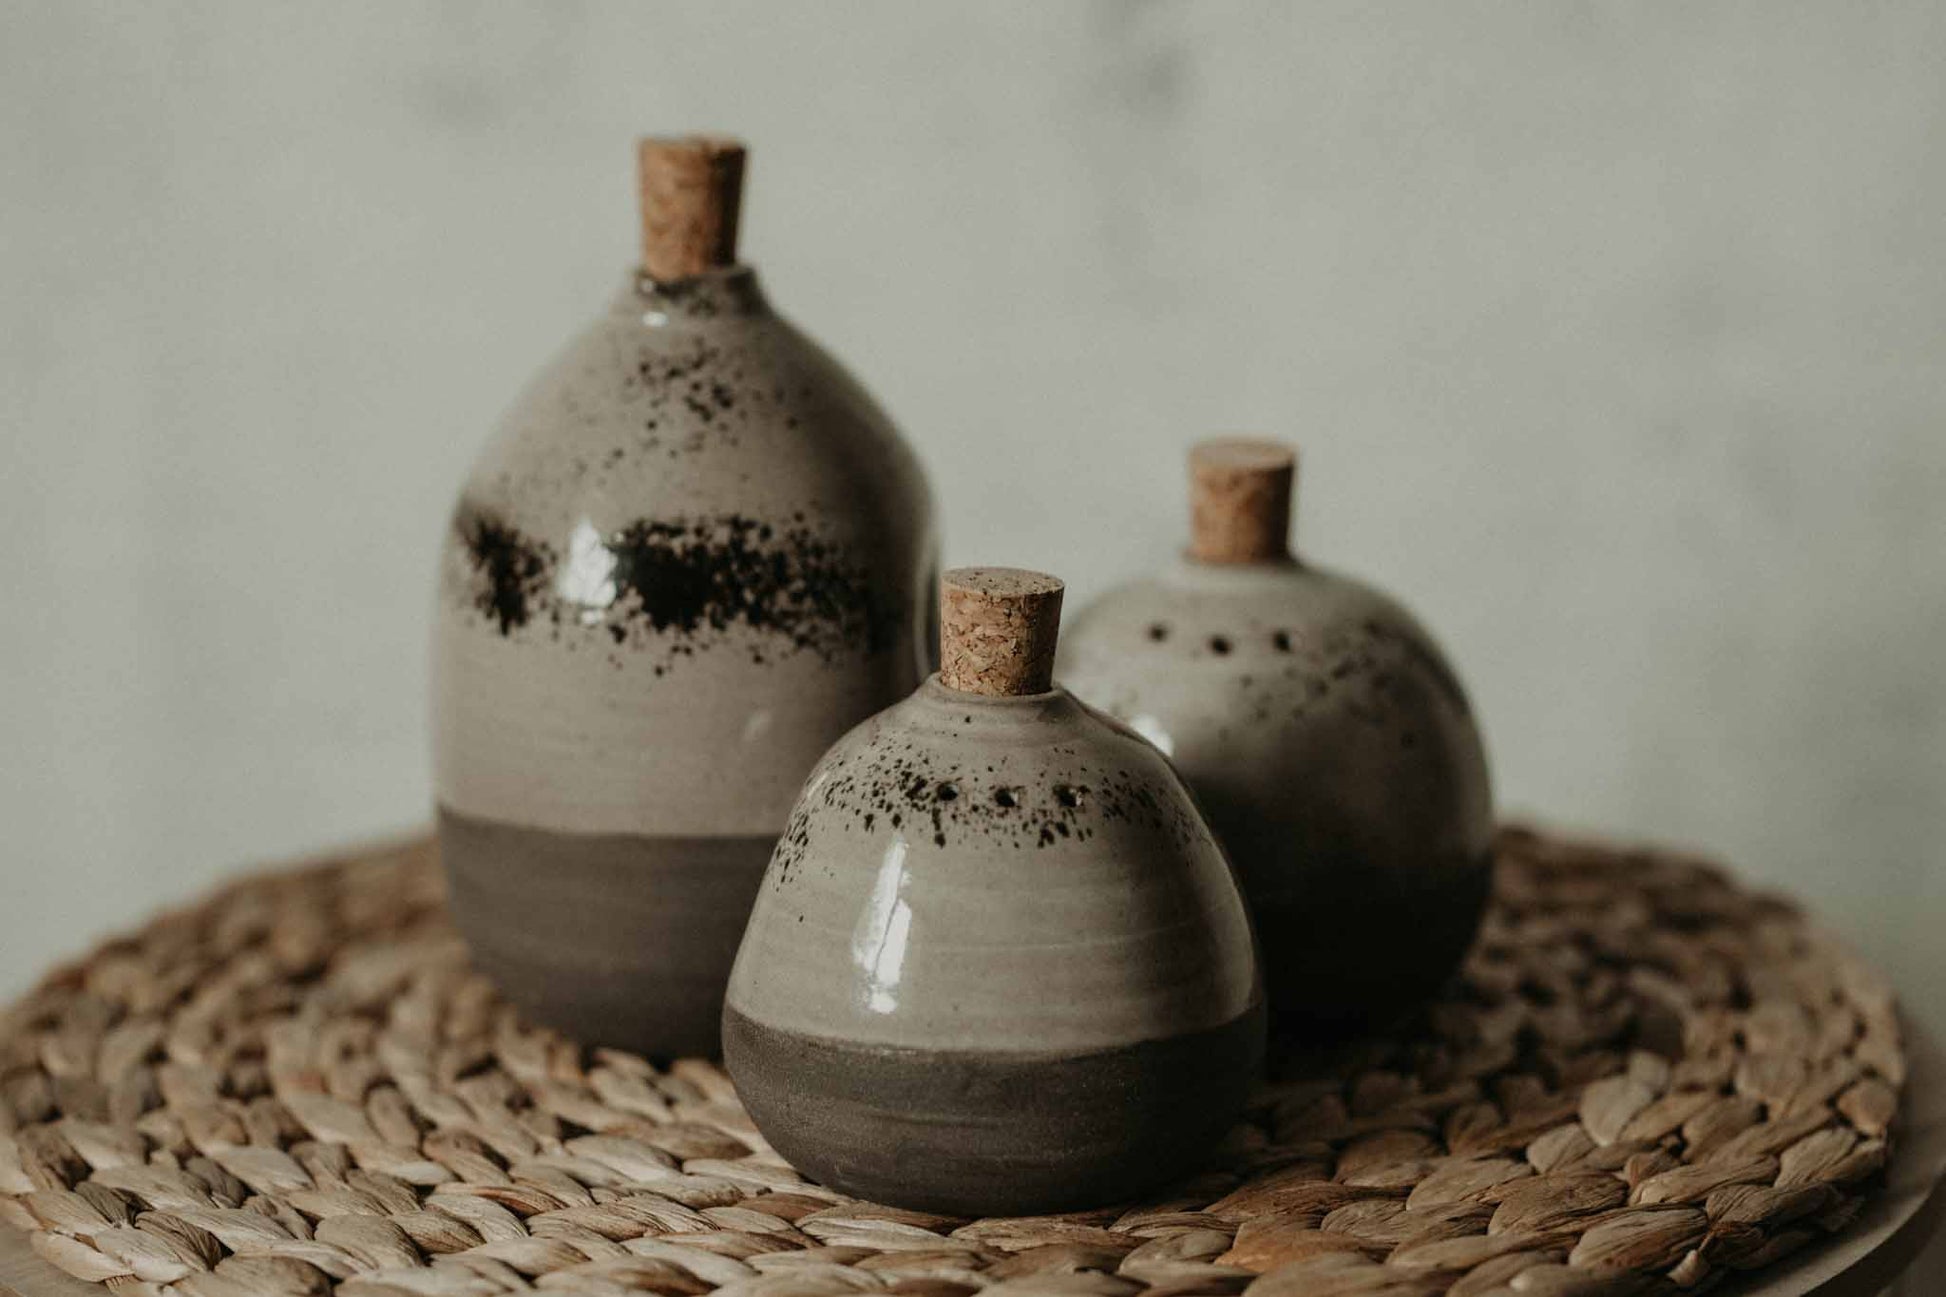 Spice up your kitchen counter with this stunning handmade ceramic oil bottle! Perfect for adding a rustic style to your kitchen space, this unique oil pourer and dispenser makes a great housewarming or hostess gift.